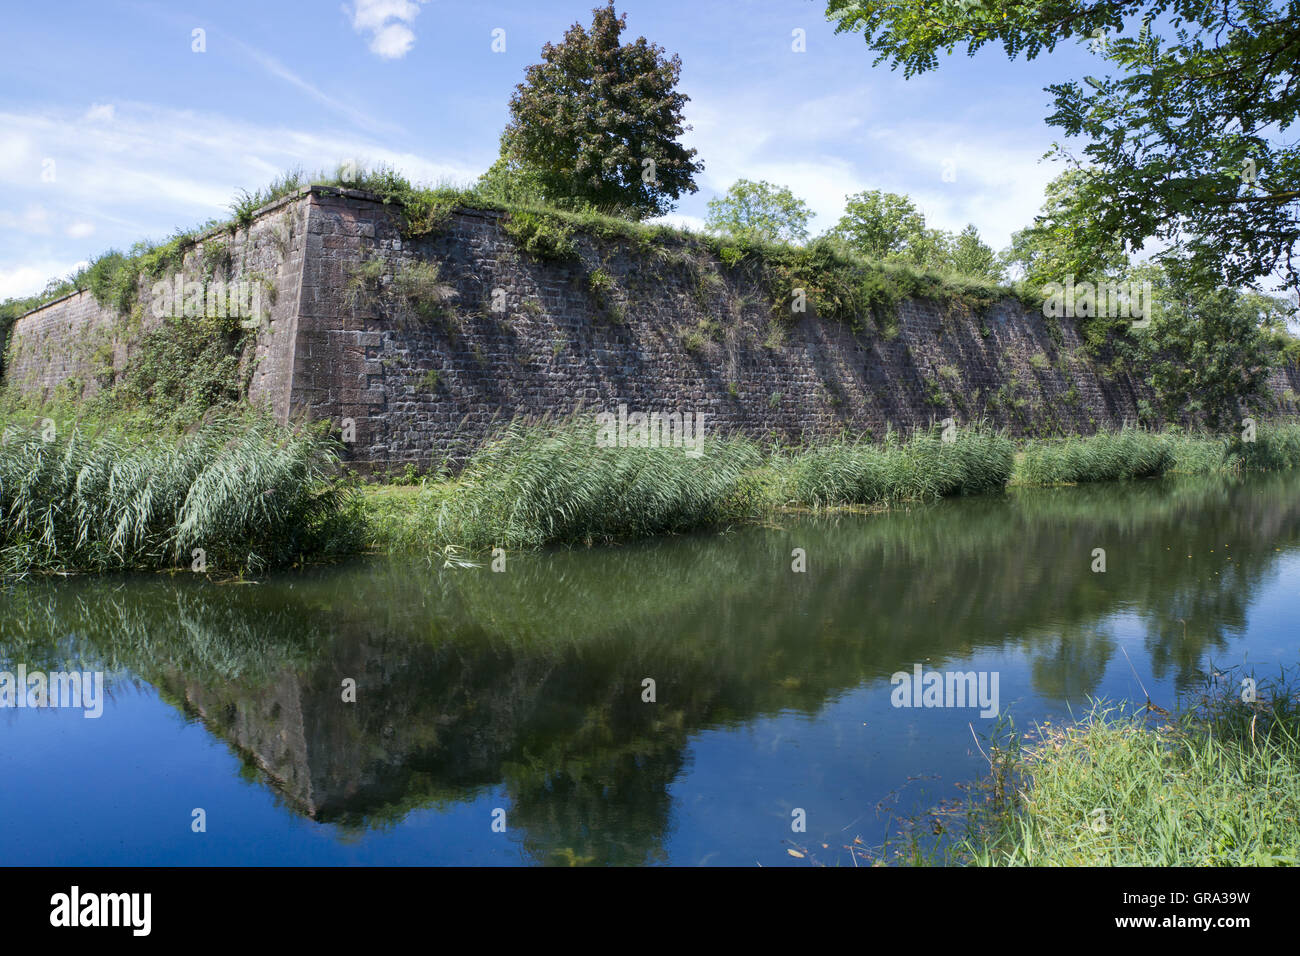 Fortifications Of Vauban, Unesco World Heritage Site, Neuf-Brisach, Alsace, France, Europe Stock Photo